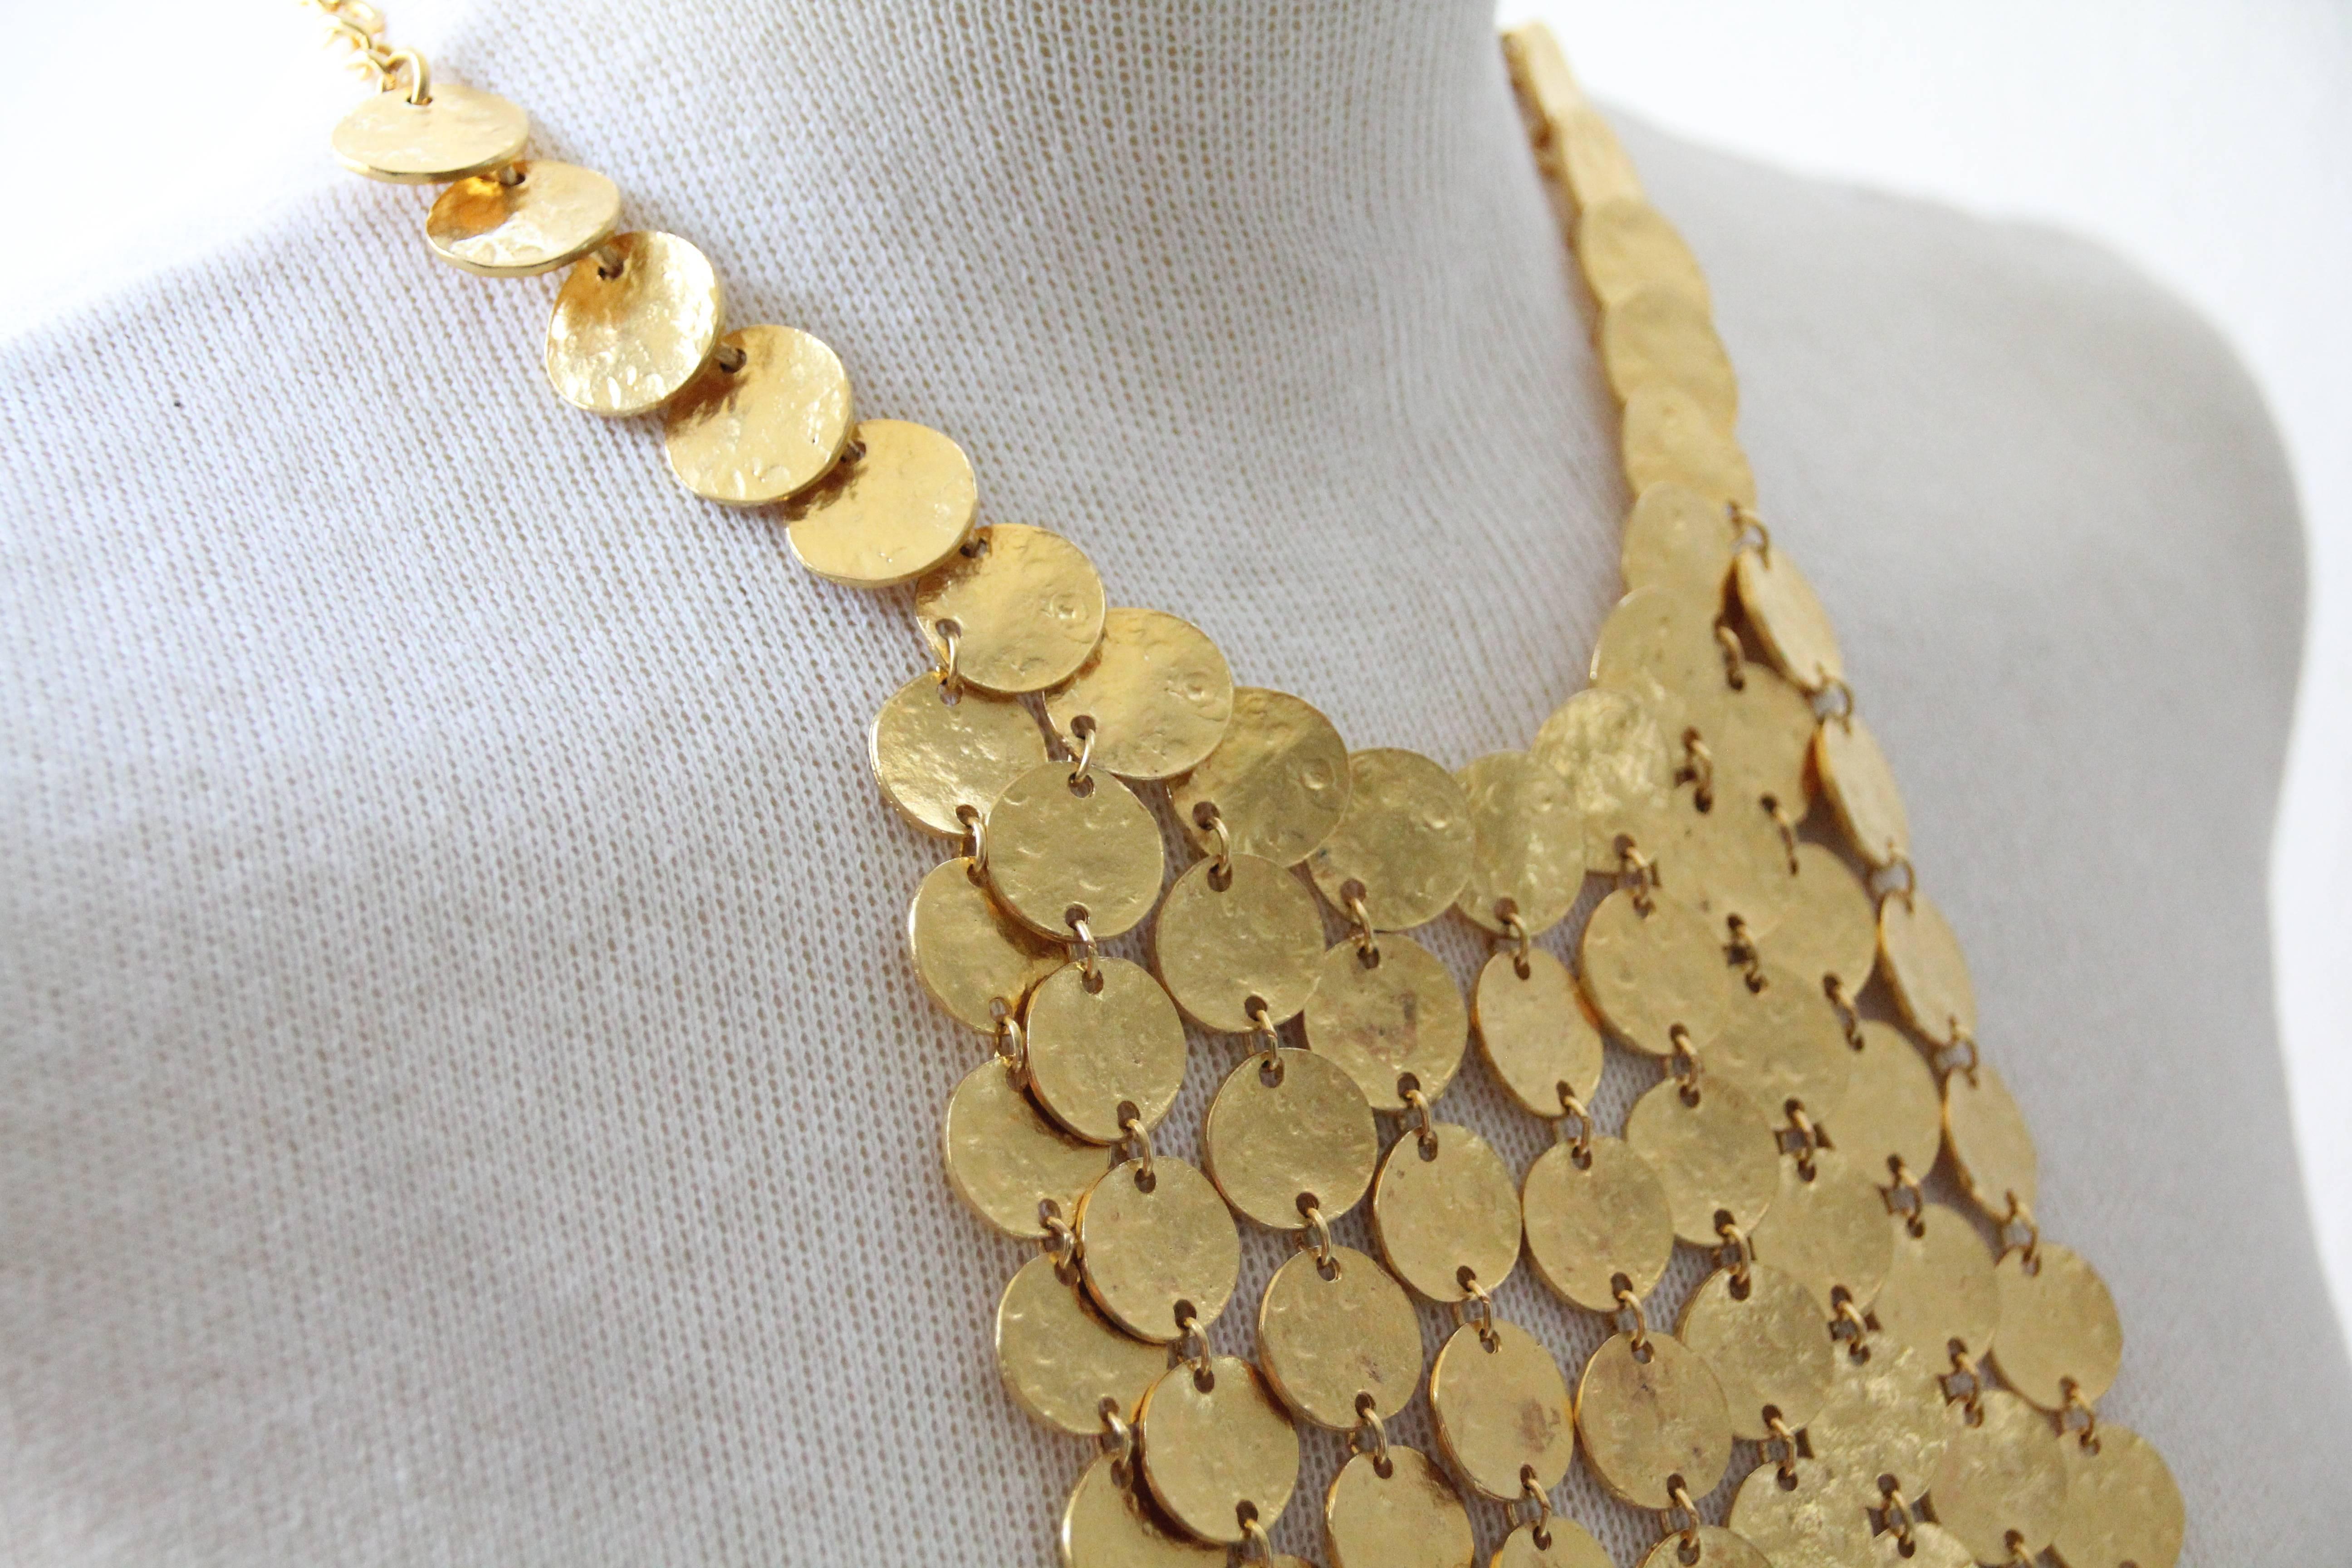 A glamorous 1970s Kenneth Jay Lane hammered coin waterfall bib necklace in graduated lengths from 5